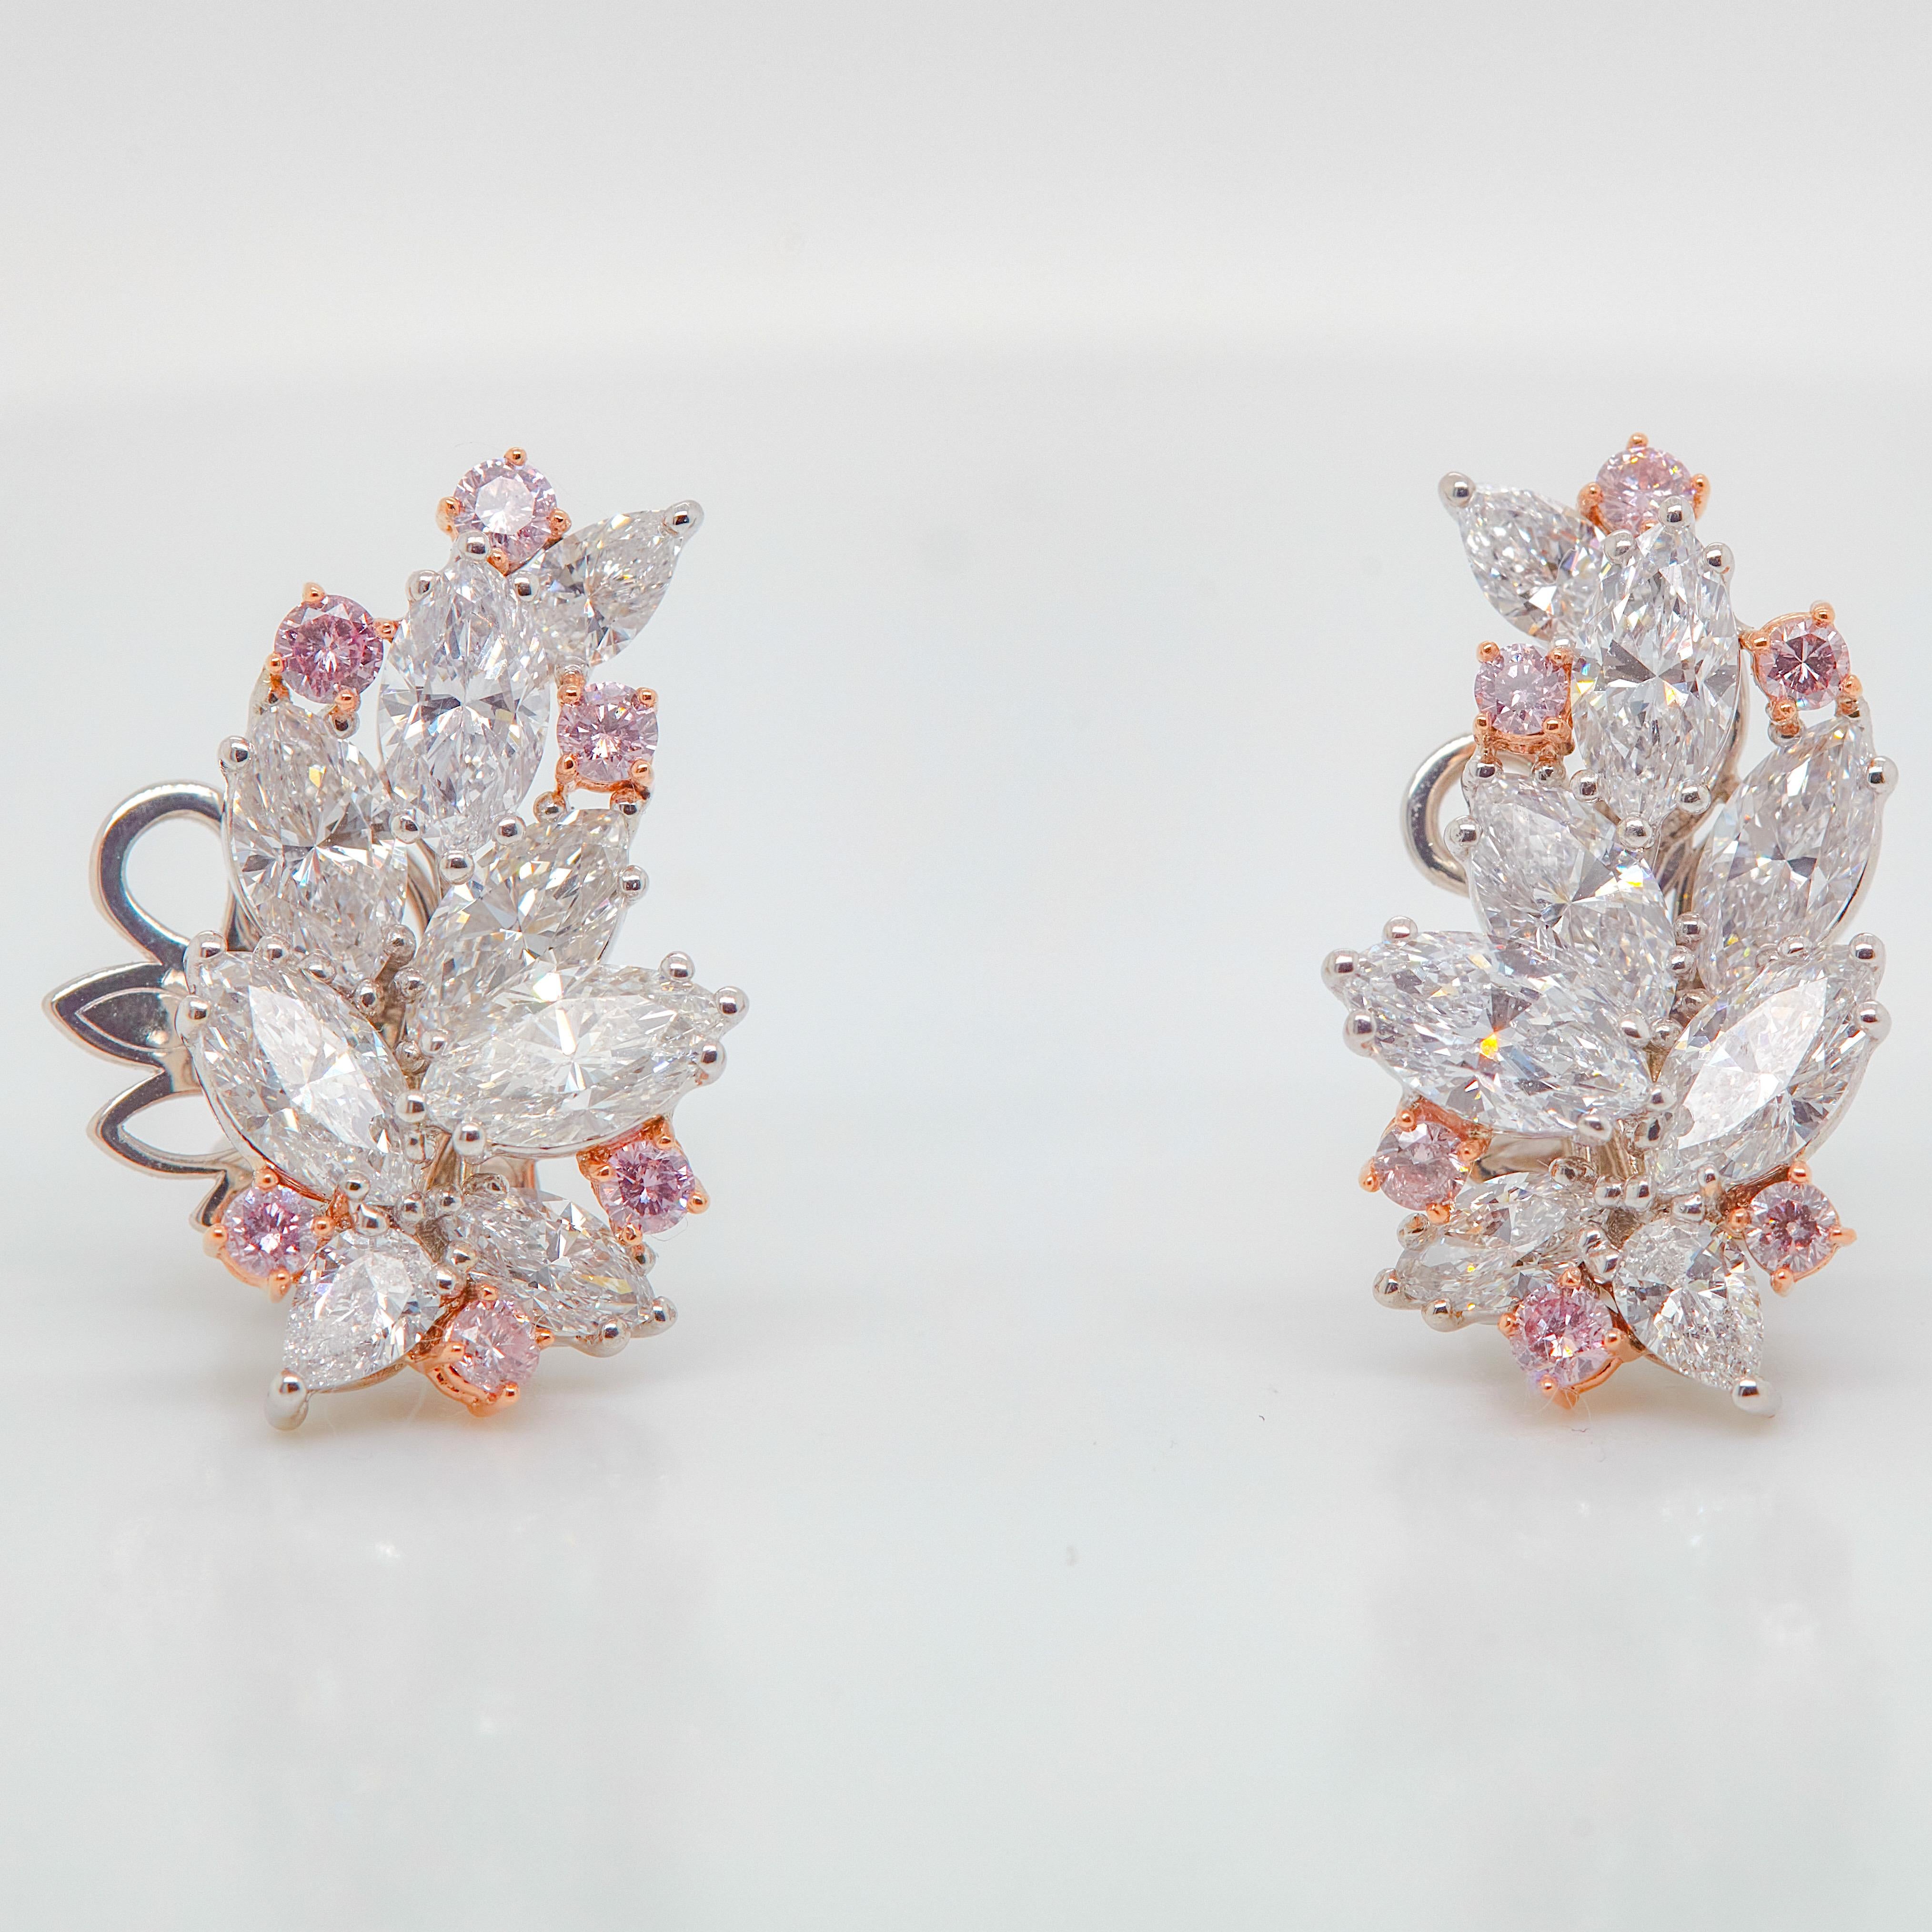 Absolutely gorgeous 6.07 carat Cluster Pink Diamond and Diamond Earrings with colorful accents, these Pink and White Diamond earrings offer a vibrant take on a classic jewel.
12 Pink diamonds weighing a total of approximately 0.55 carats with 12